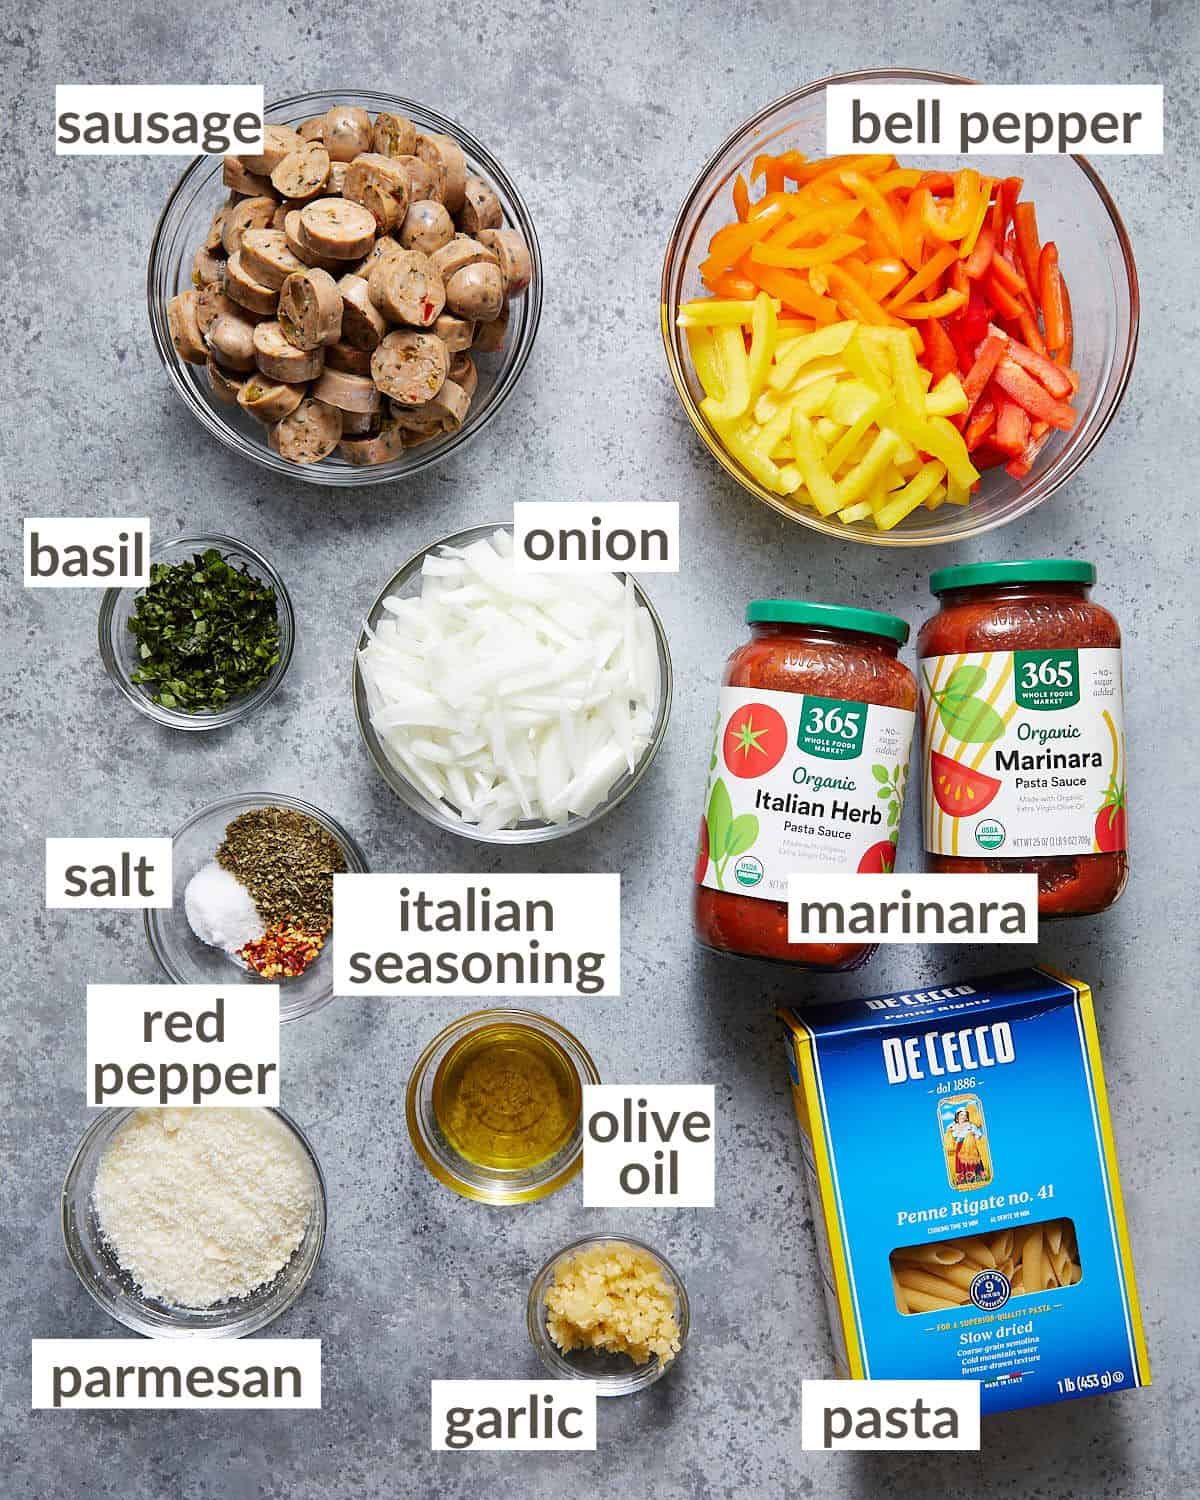 Ingredients needed in glass bowls to make pasta with sausage and peppers.